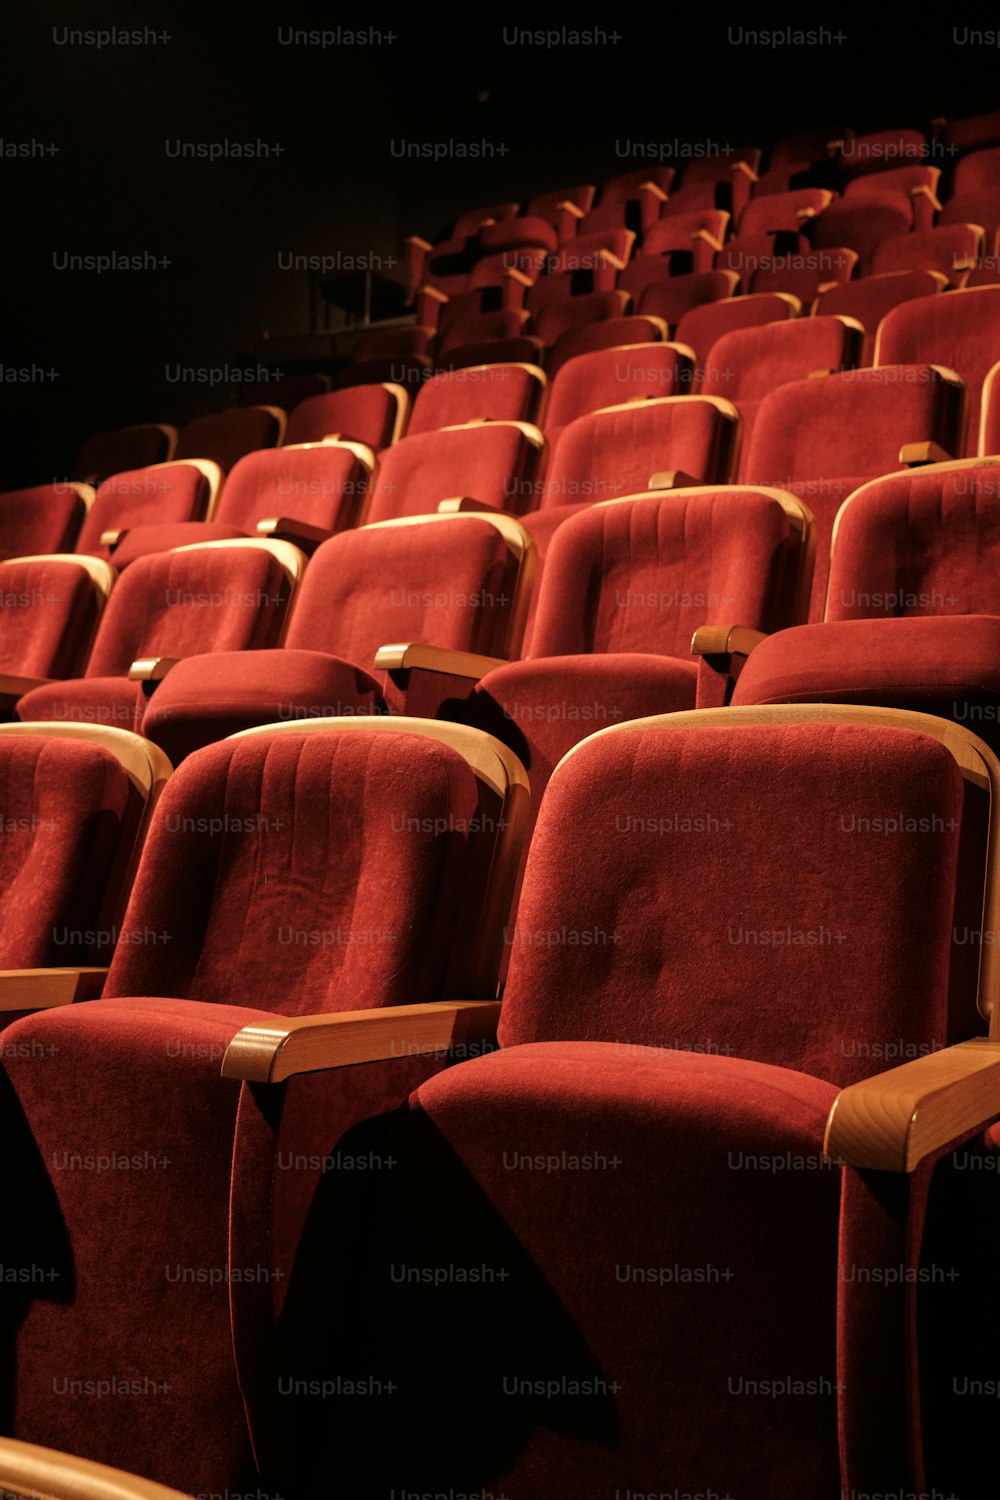 a row of red seats in a theater